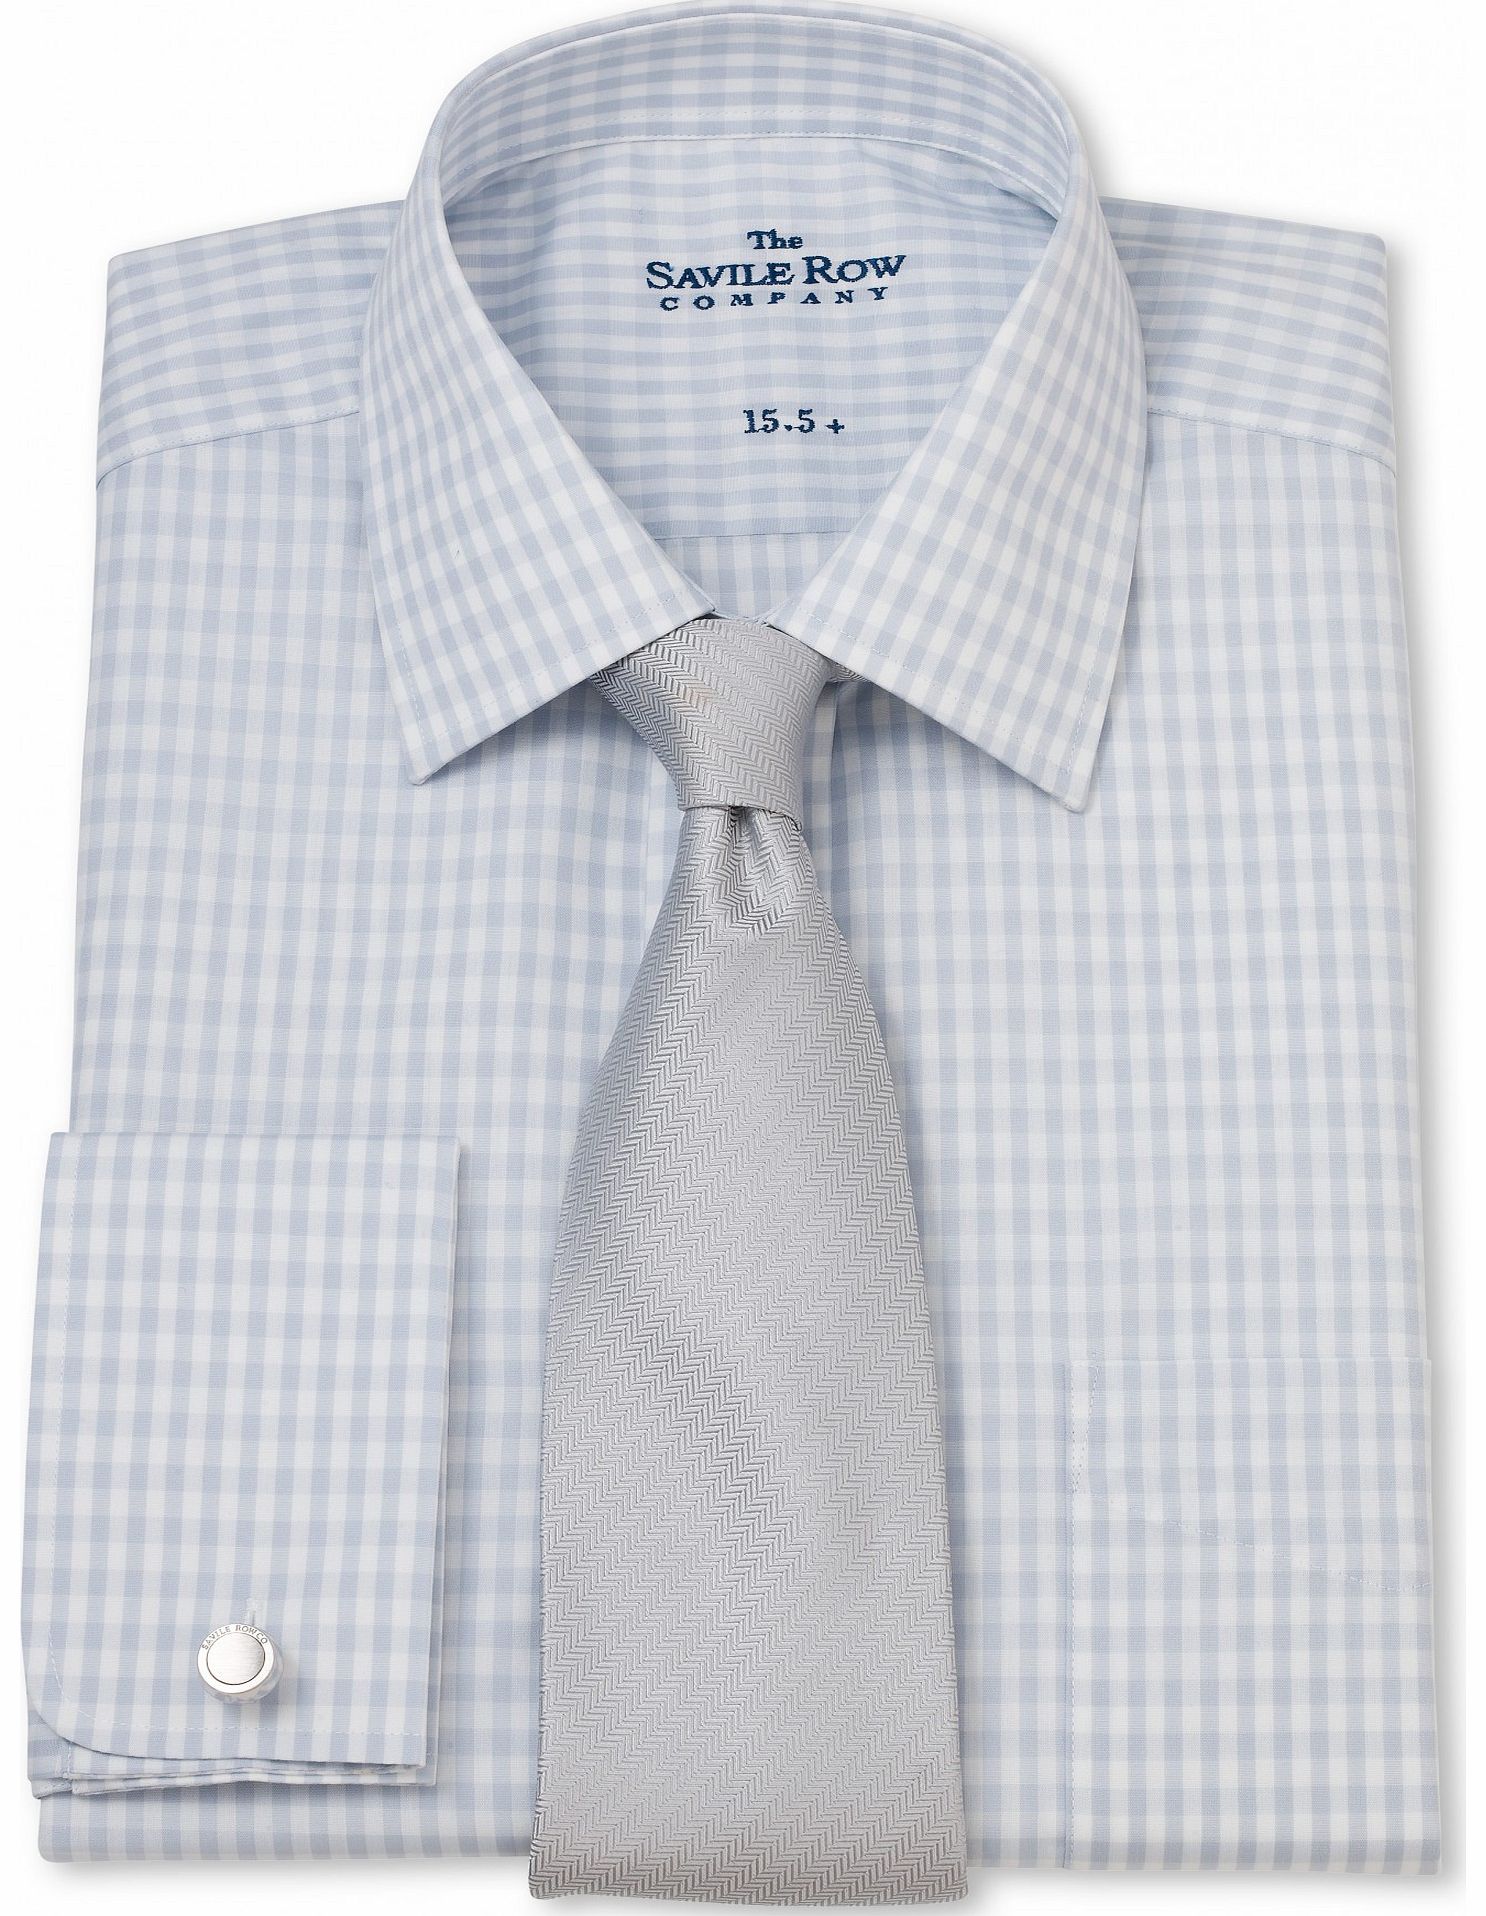 Savile Row Company Grey White Gingham Check Classic Fit Shirt 15